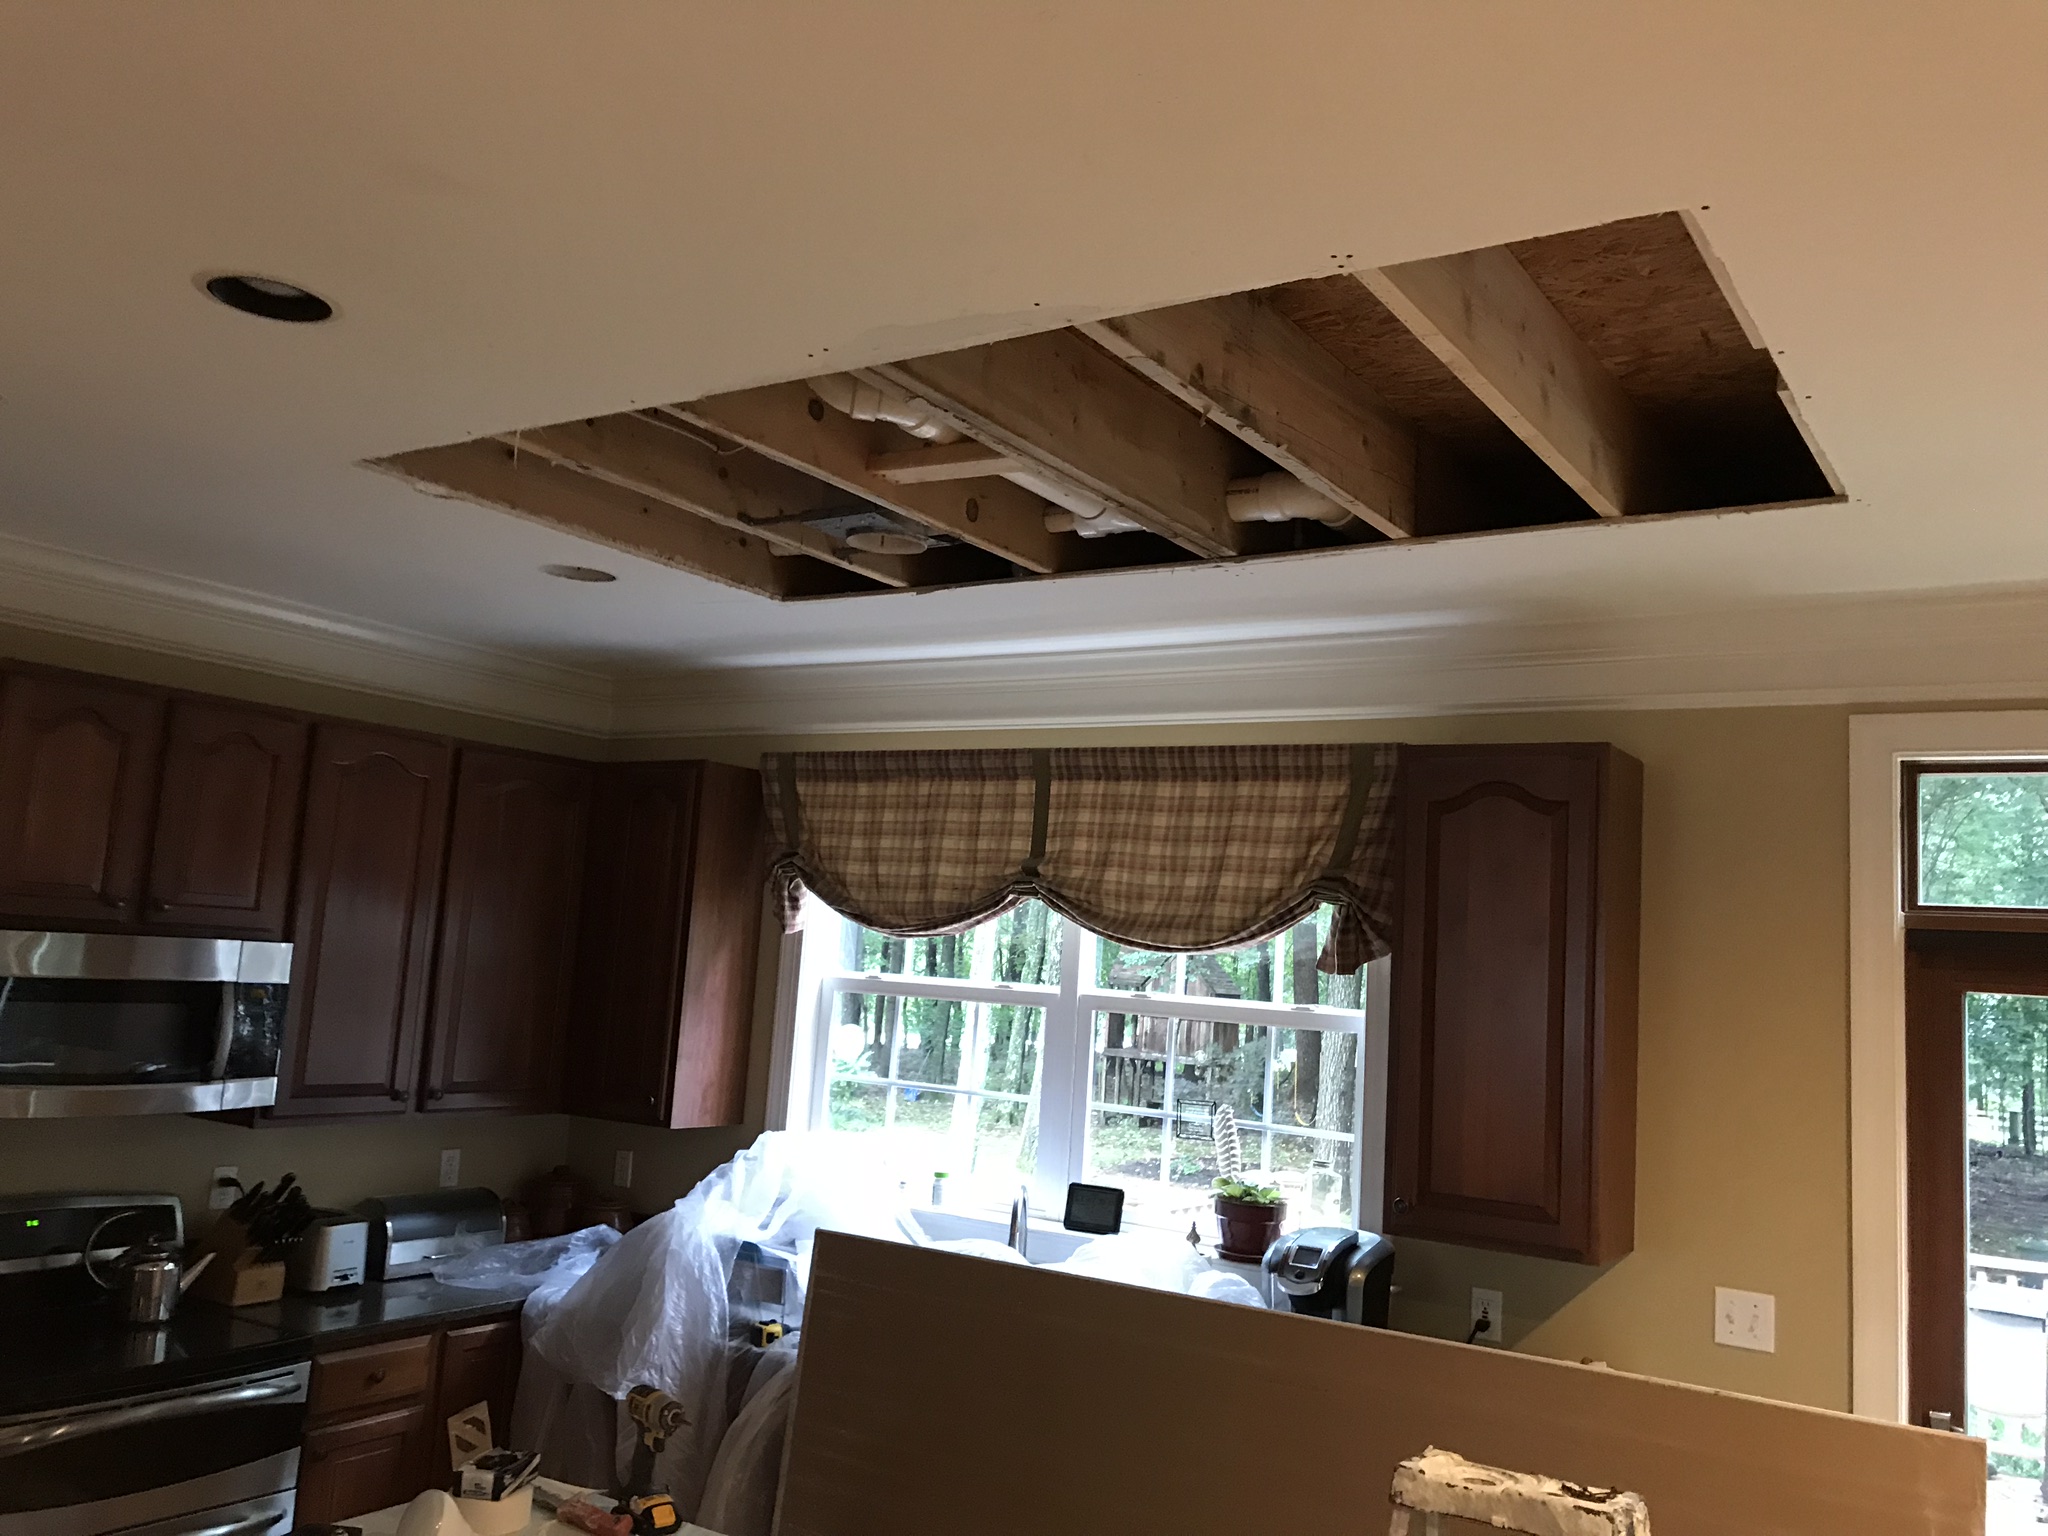 Water Damage Drywall Cut Out